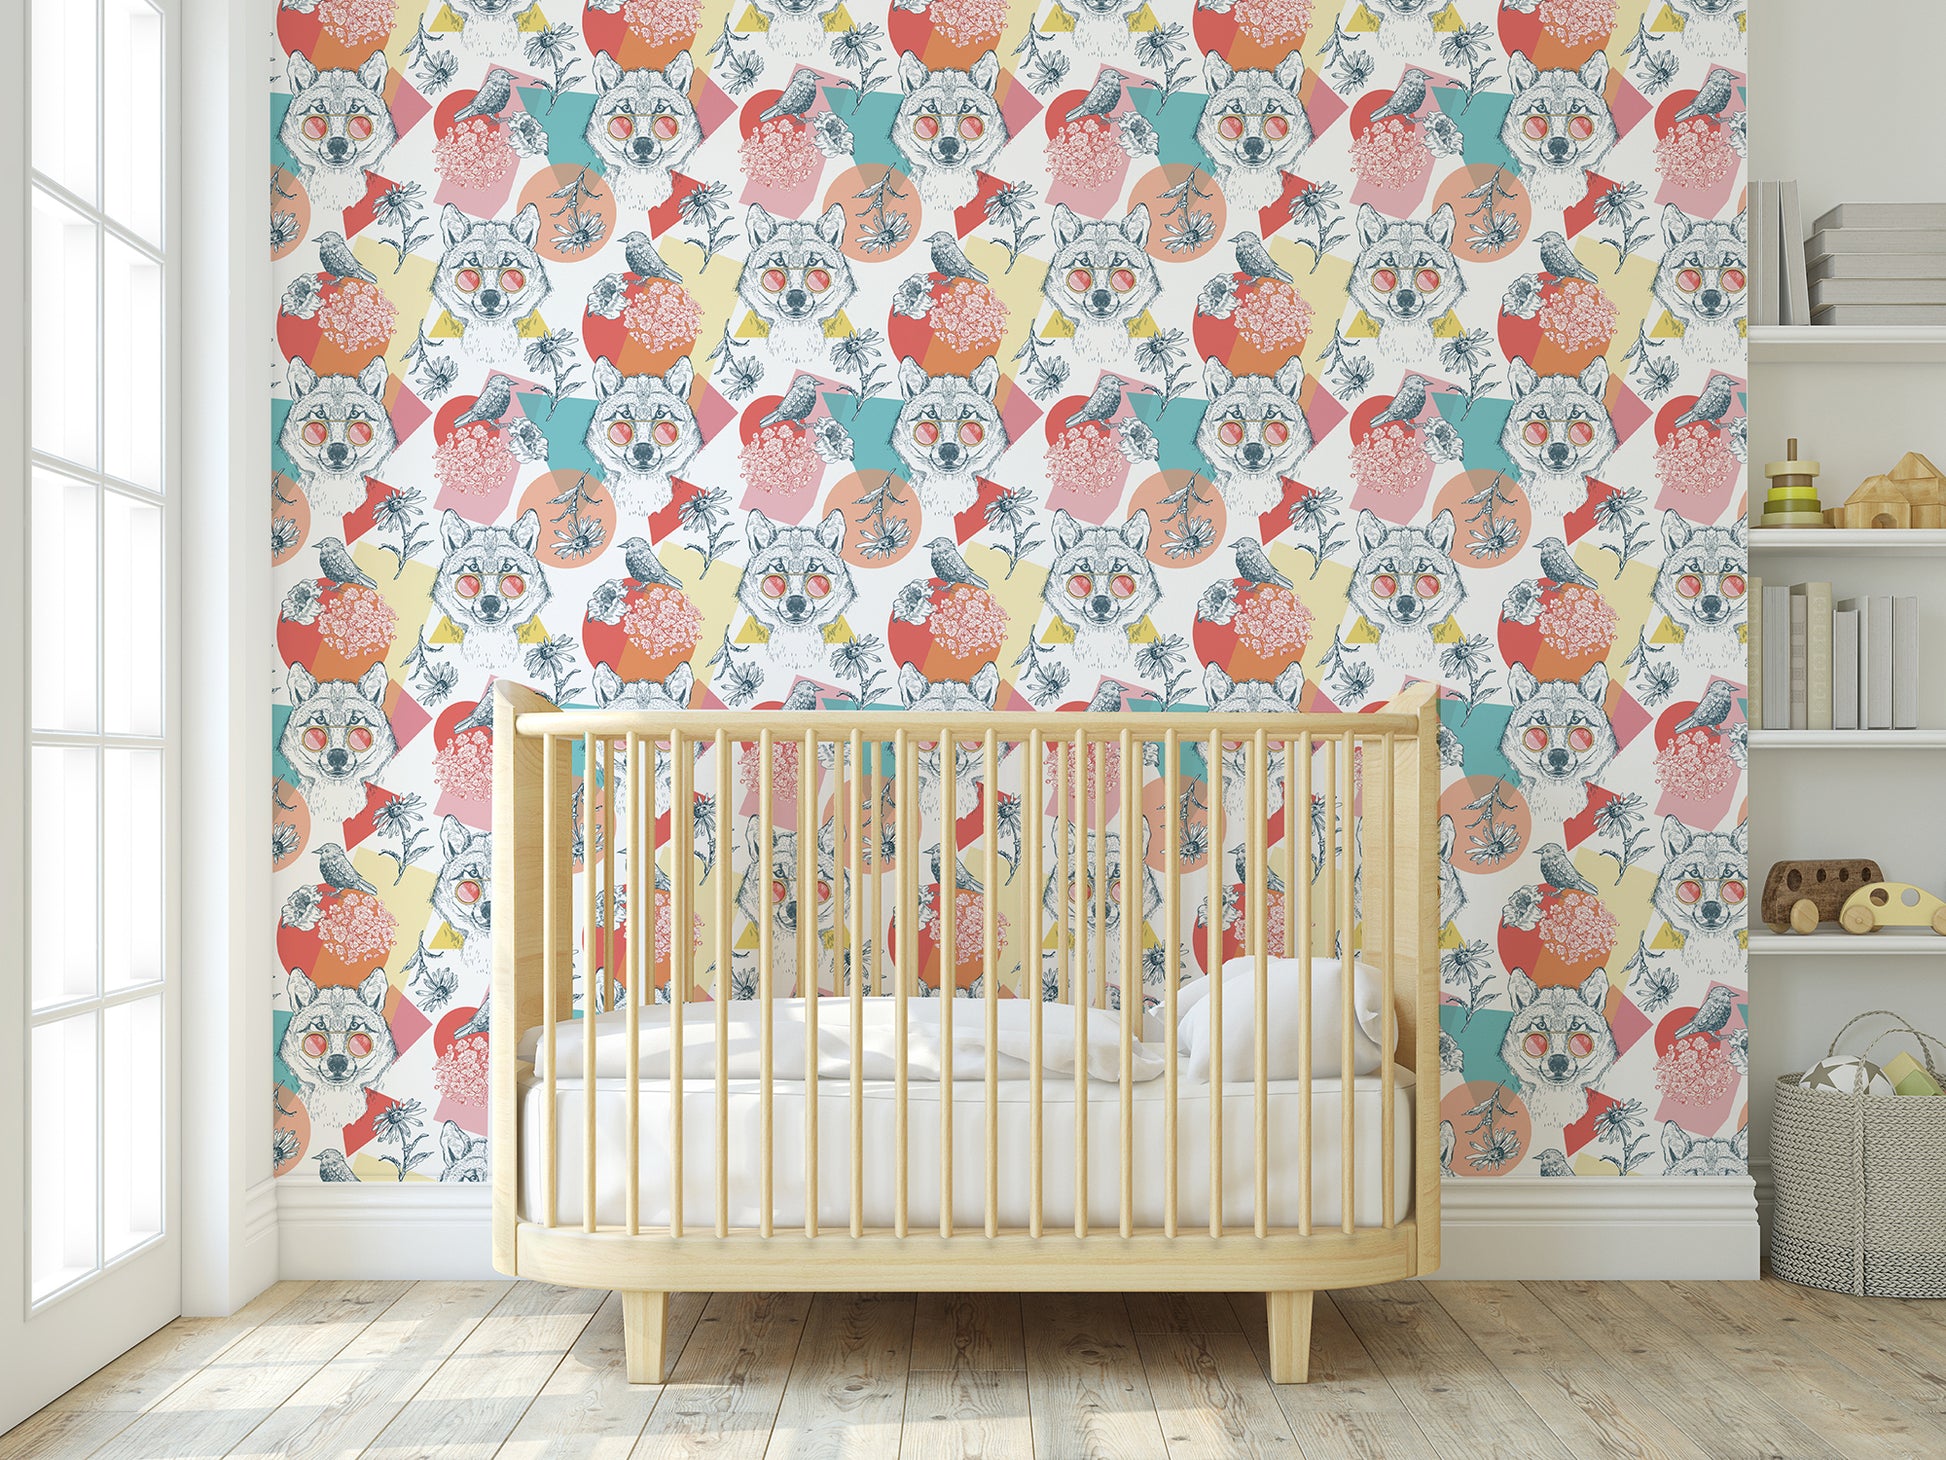 Colorful wolf in sunglasses removable peel and stick wallpaper in nursery